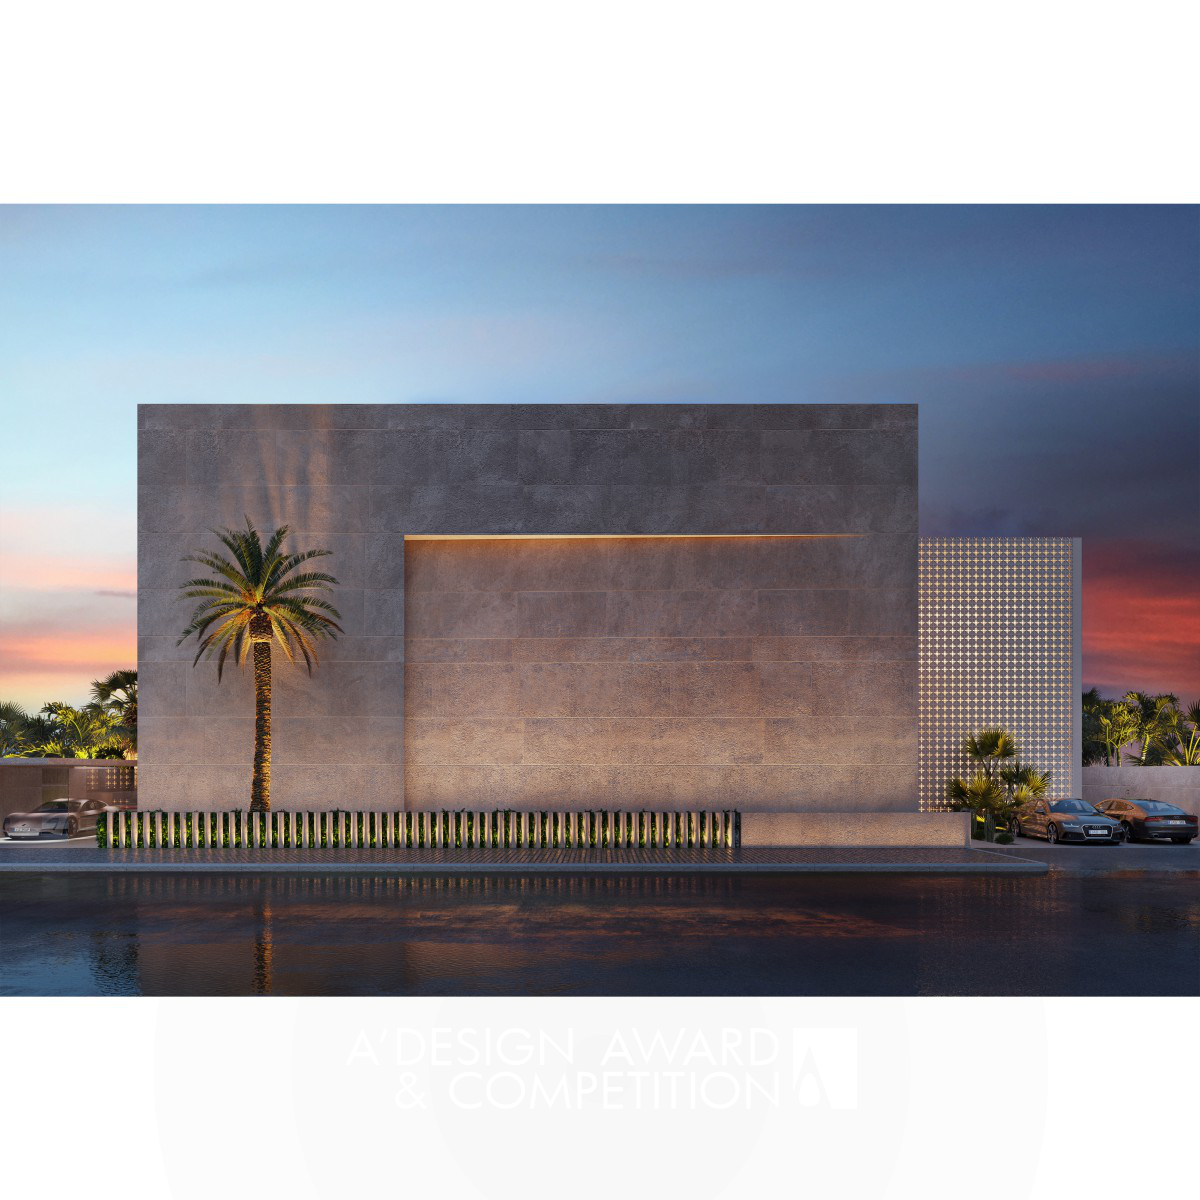 Ahmed Habib wins Golden at the prestigious A' Architecture, Building and Structure Design Award with Monolithic House Private Villa.